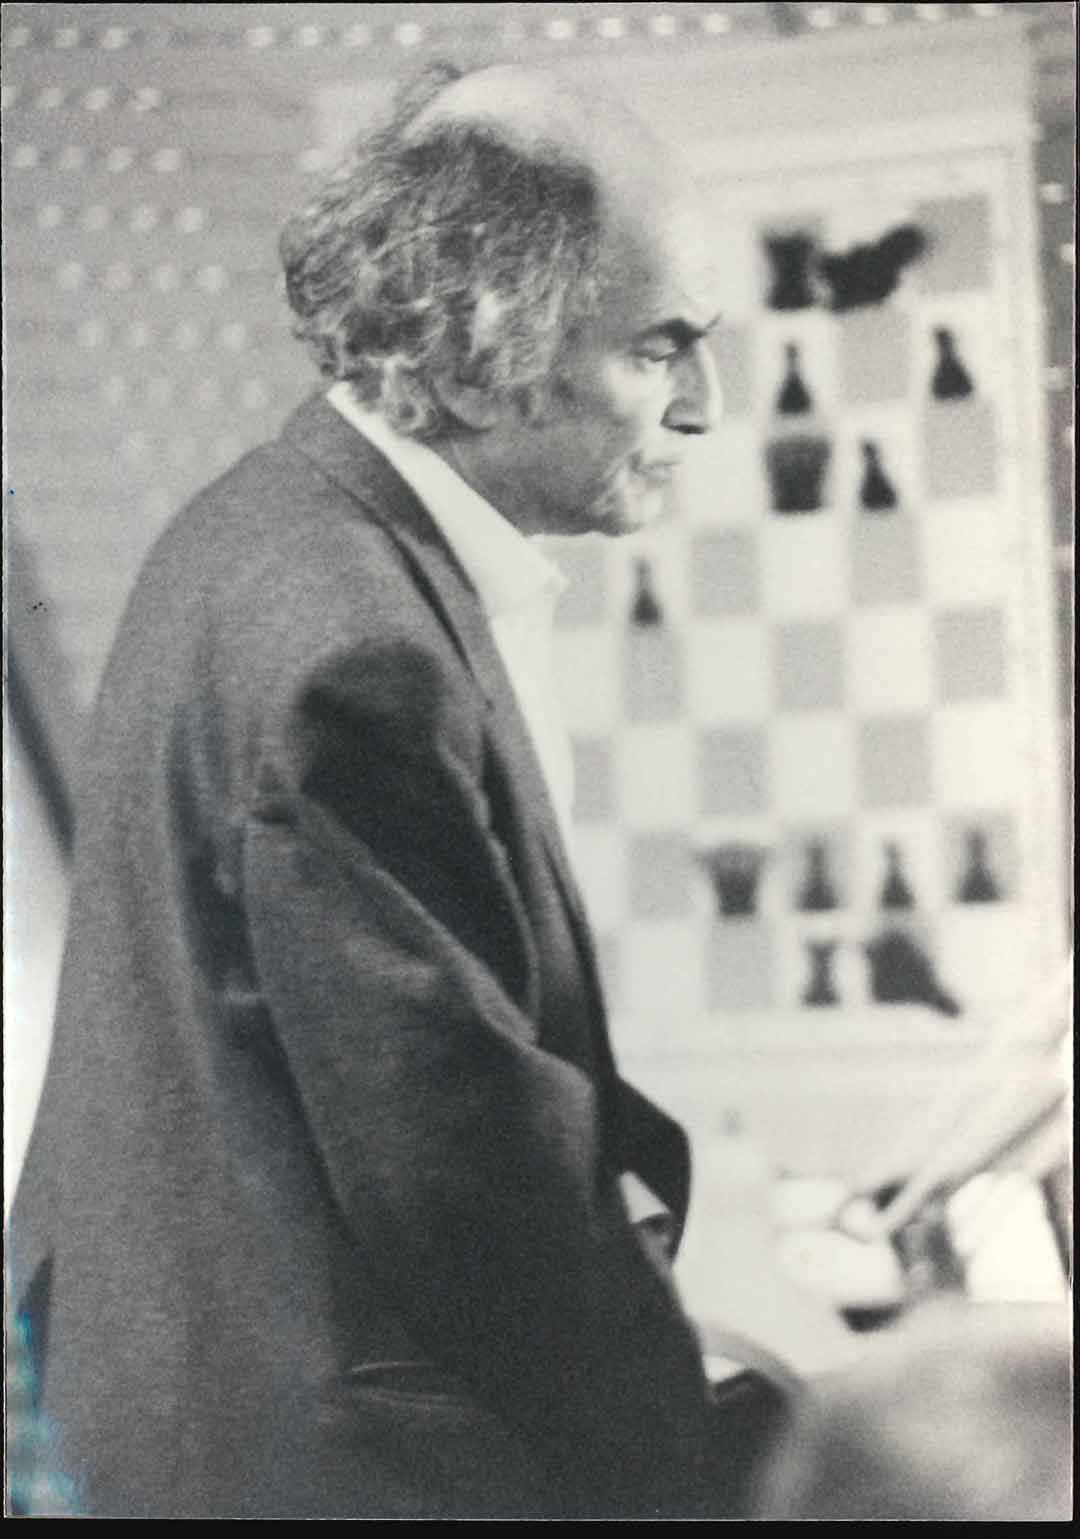 International Chess Federation on X: Mikhail Tal was born on this day in  1936 in Riga, Latvia. The Magician from Riga became Wolrd Champion in  1960, defeating Mikhail Botvinnik by 12.5-8.5, at